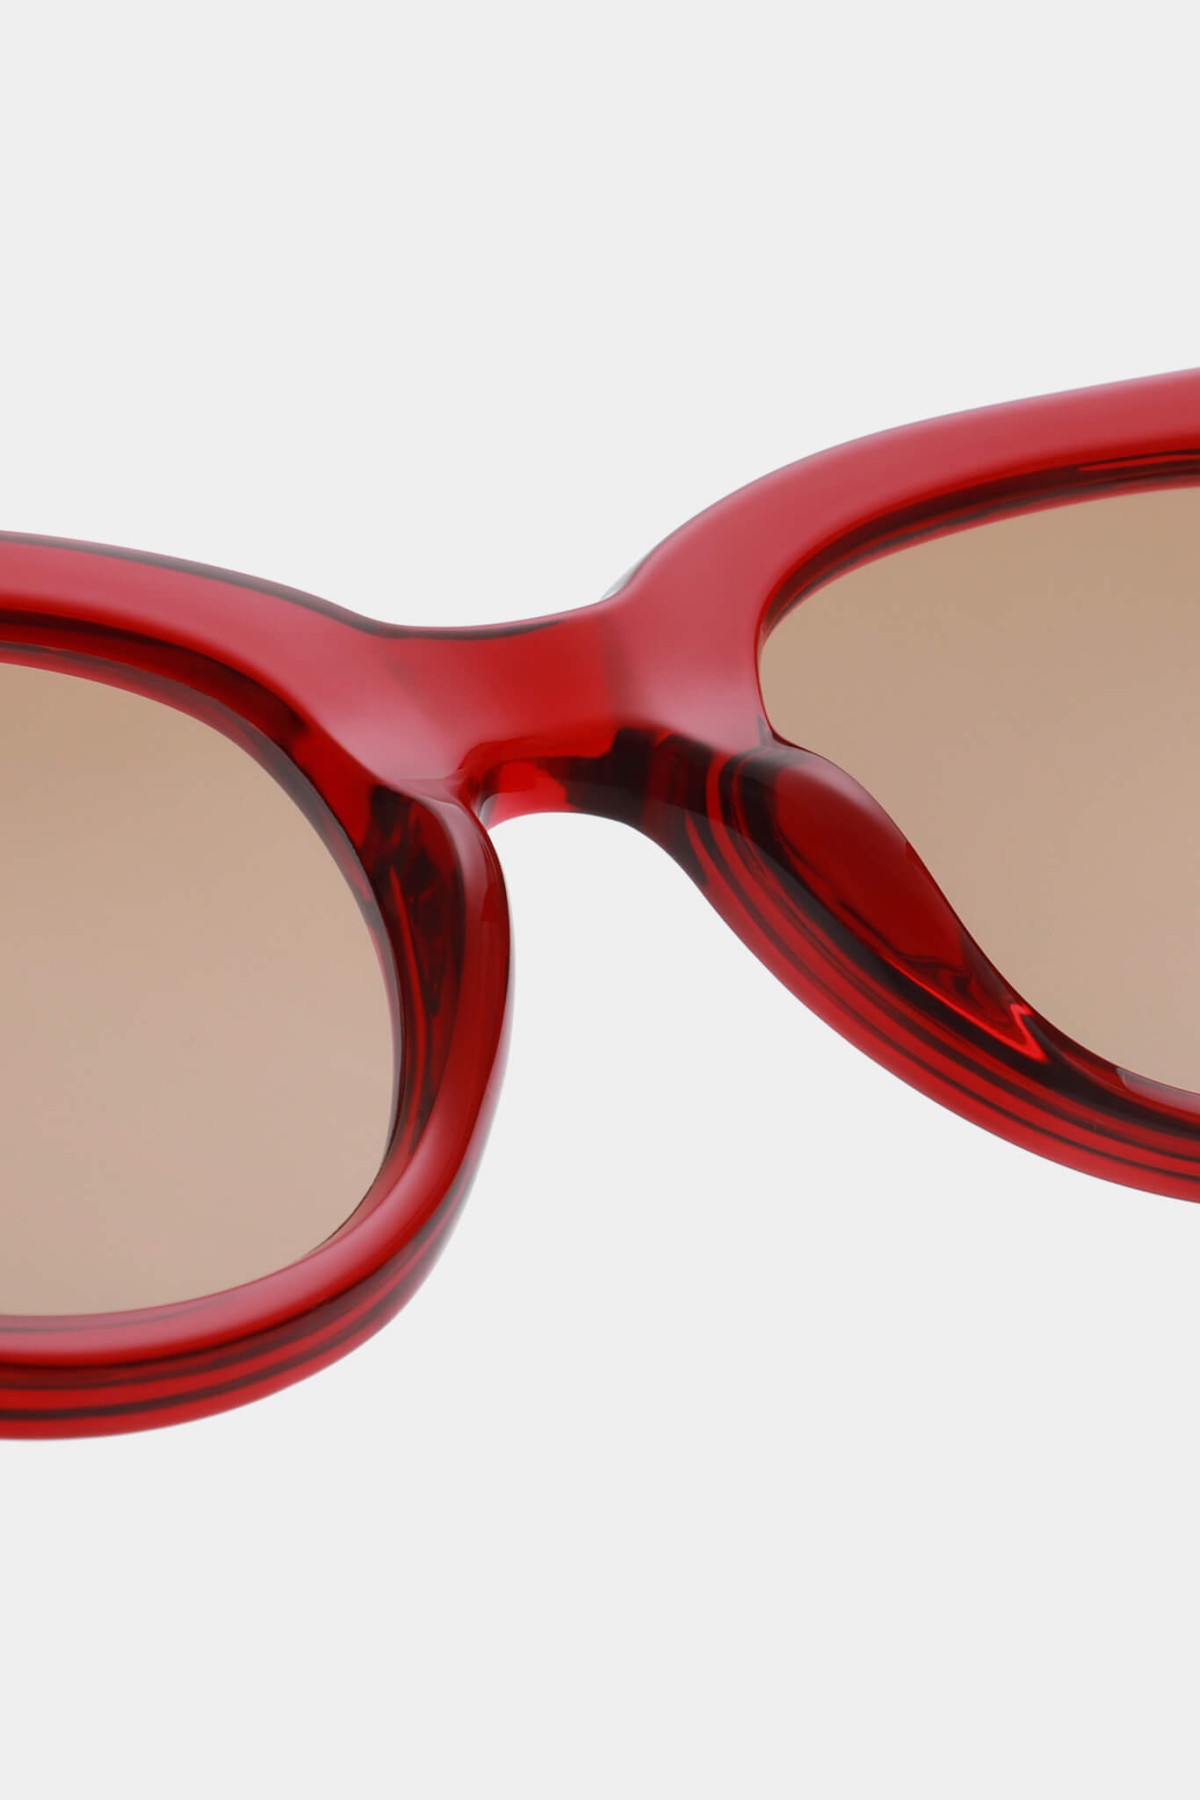 SUNGLASSES RED - LILLY – UV 400 PROTECTION